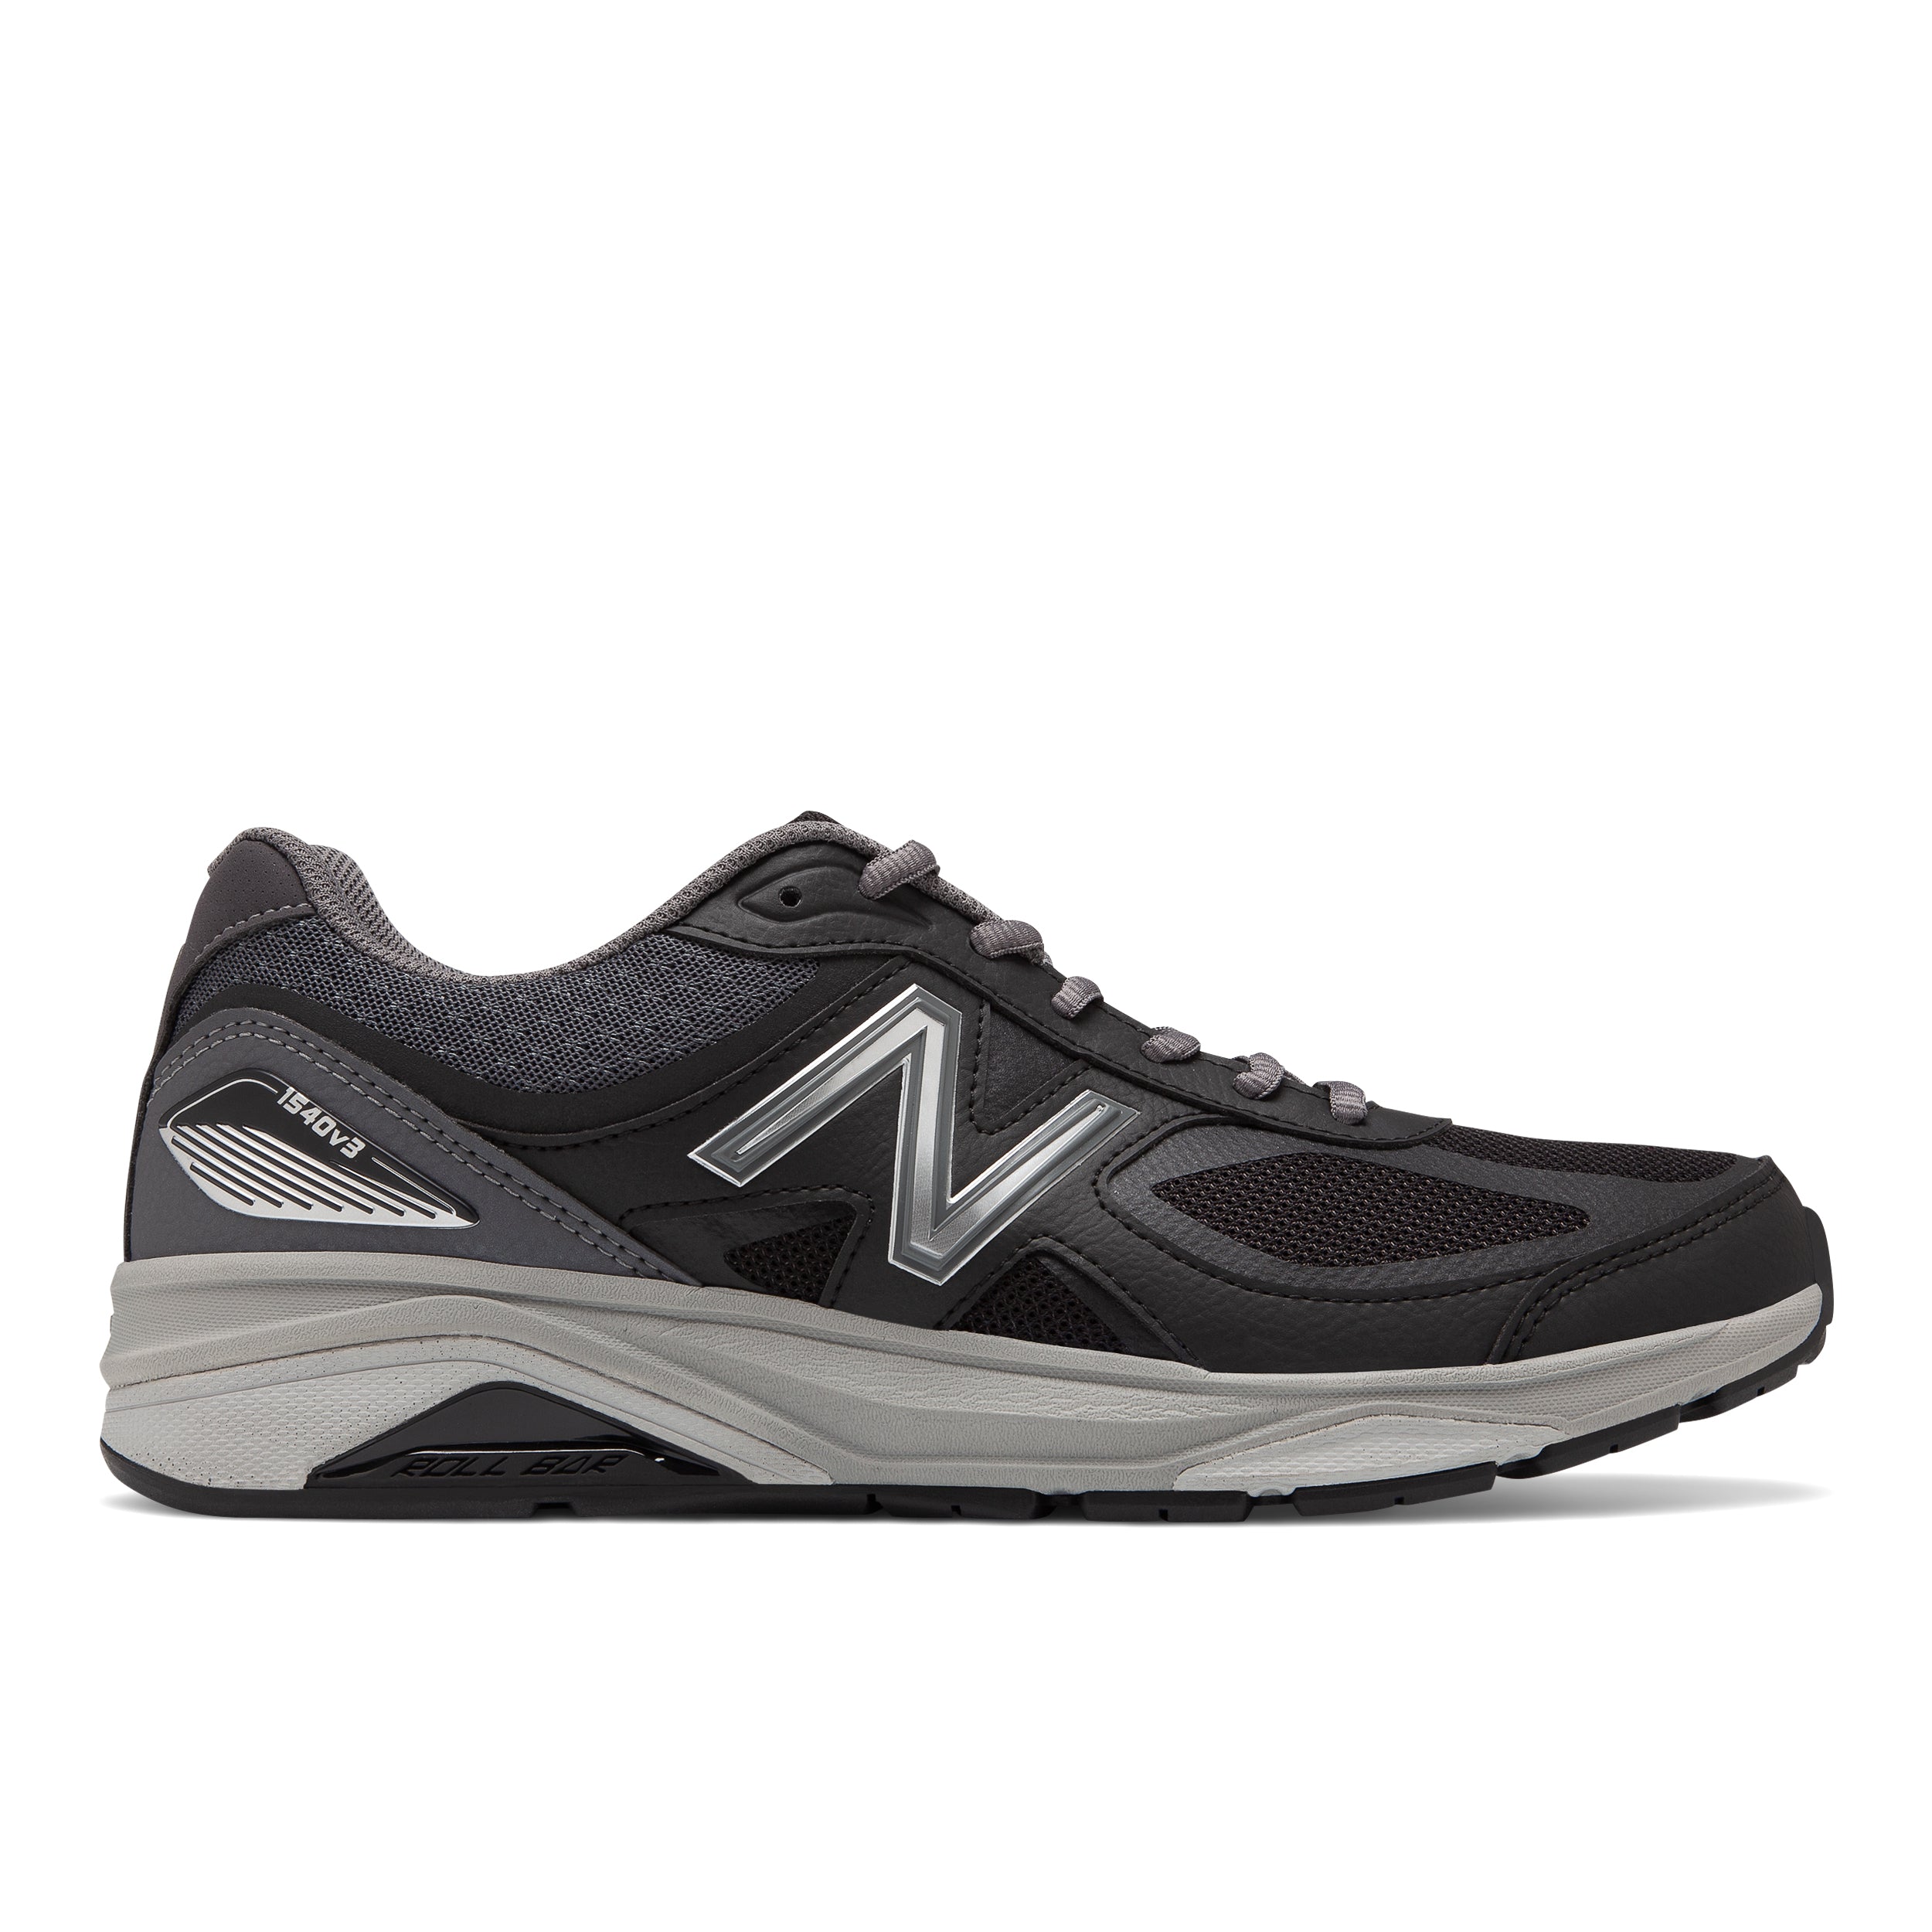 Men's New Balance M1540BK3 Stability Running Shoes with ROLLBAR